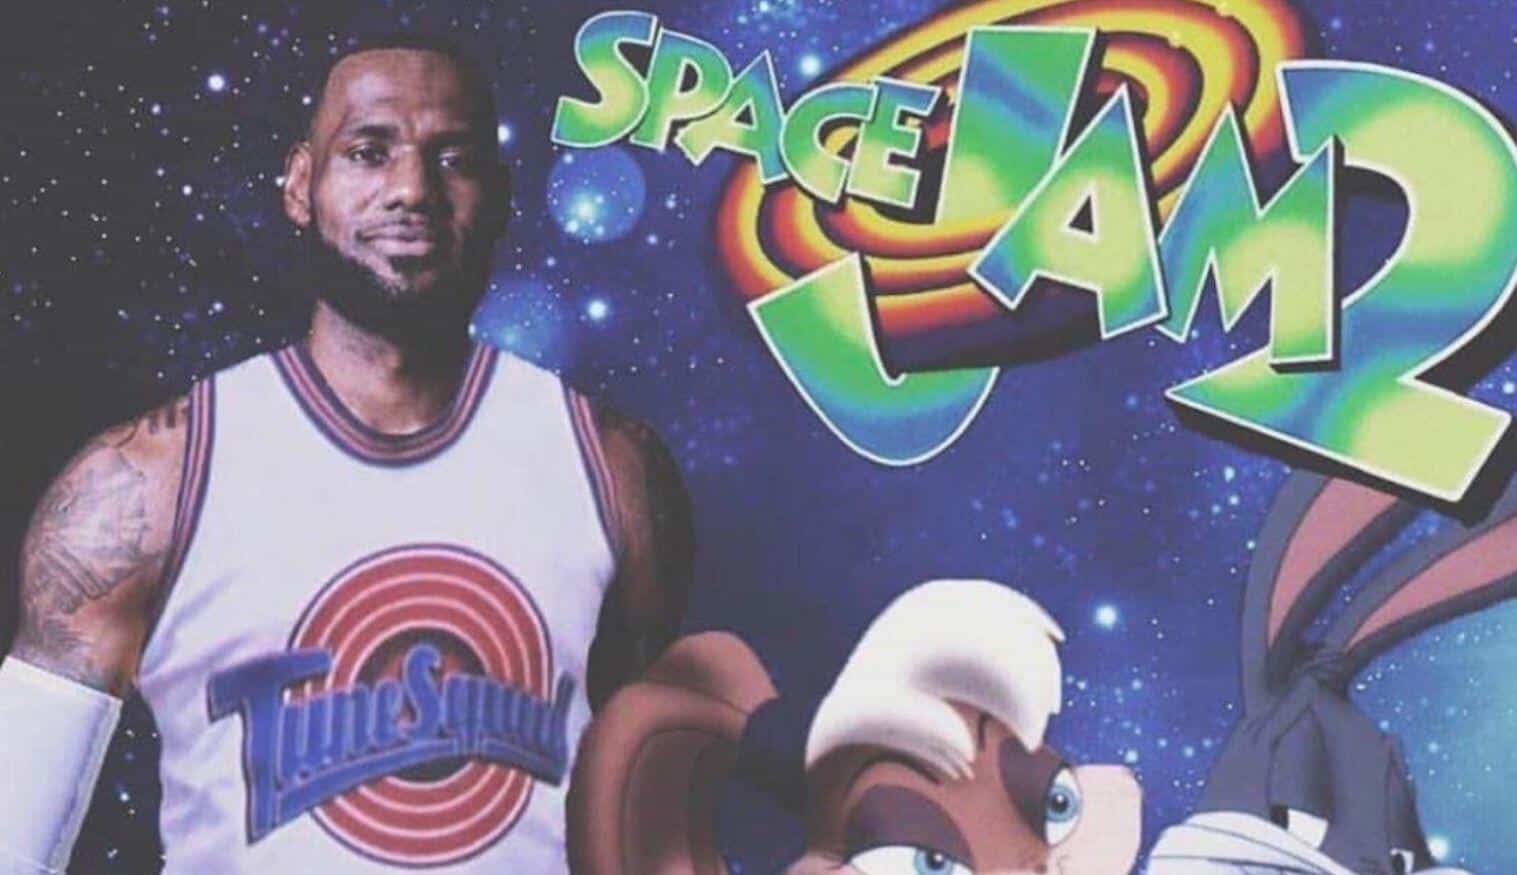 First Look At New Uniforms For LeBron James' 'Space Jam 2' Revealed1517 x 875